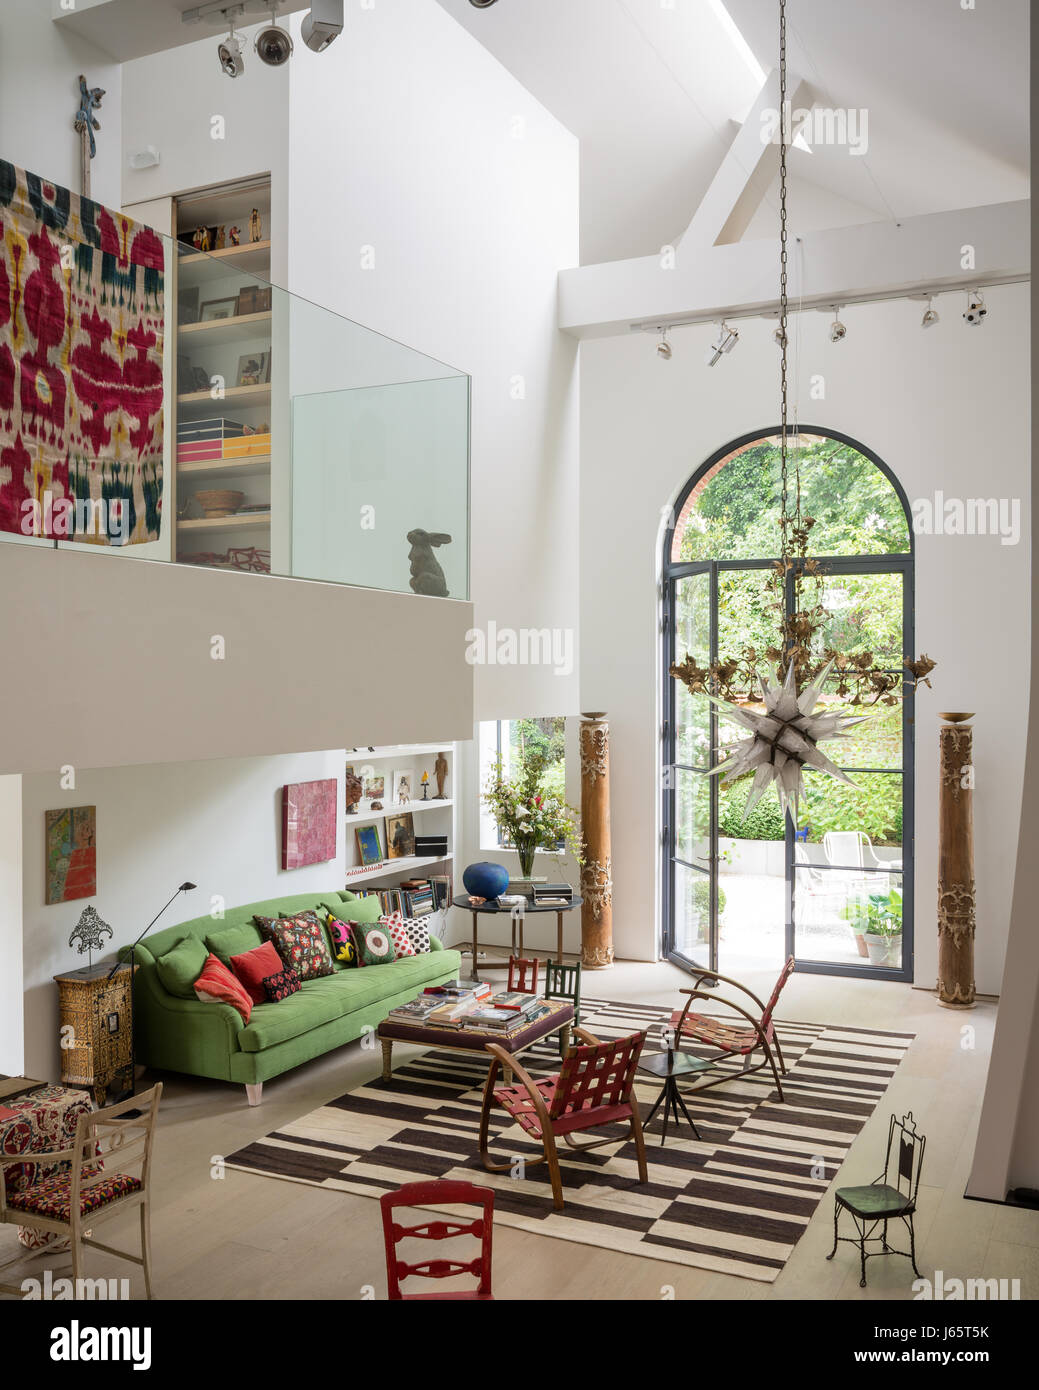 Triple-height living space with mezzanine and old textiles adding colour Stock Photo